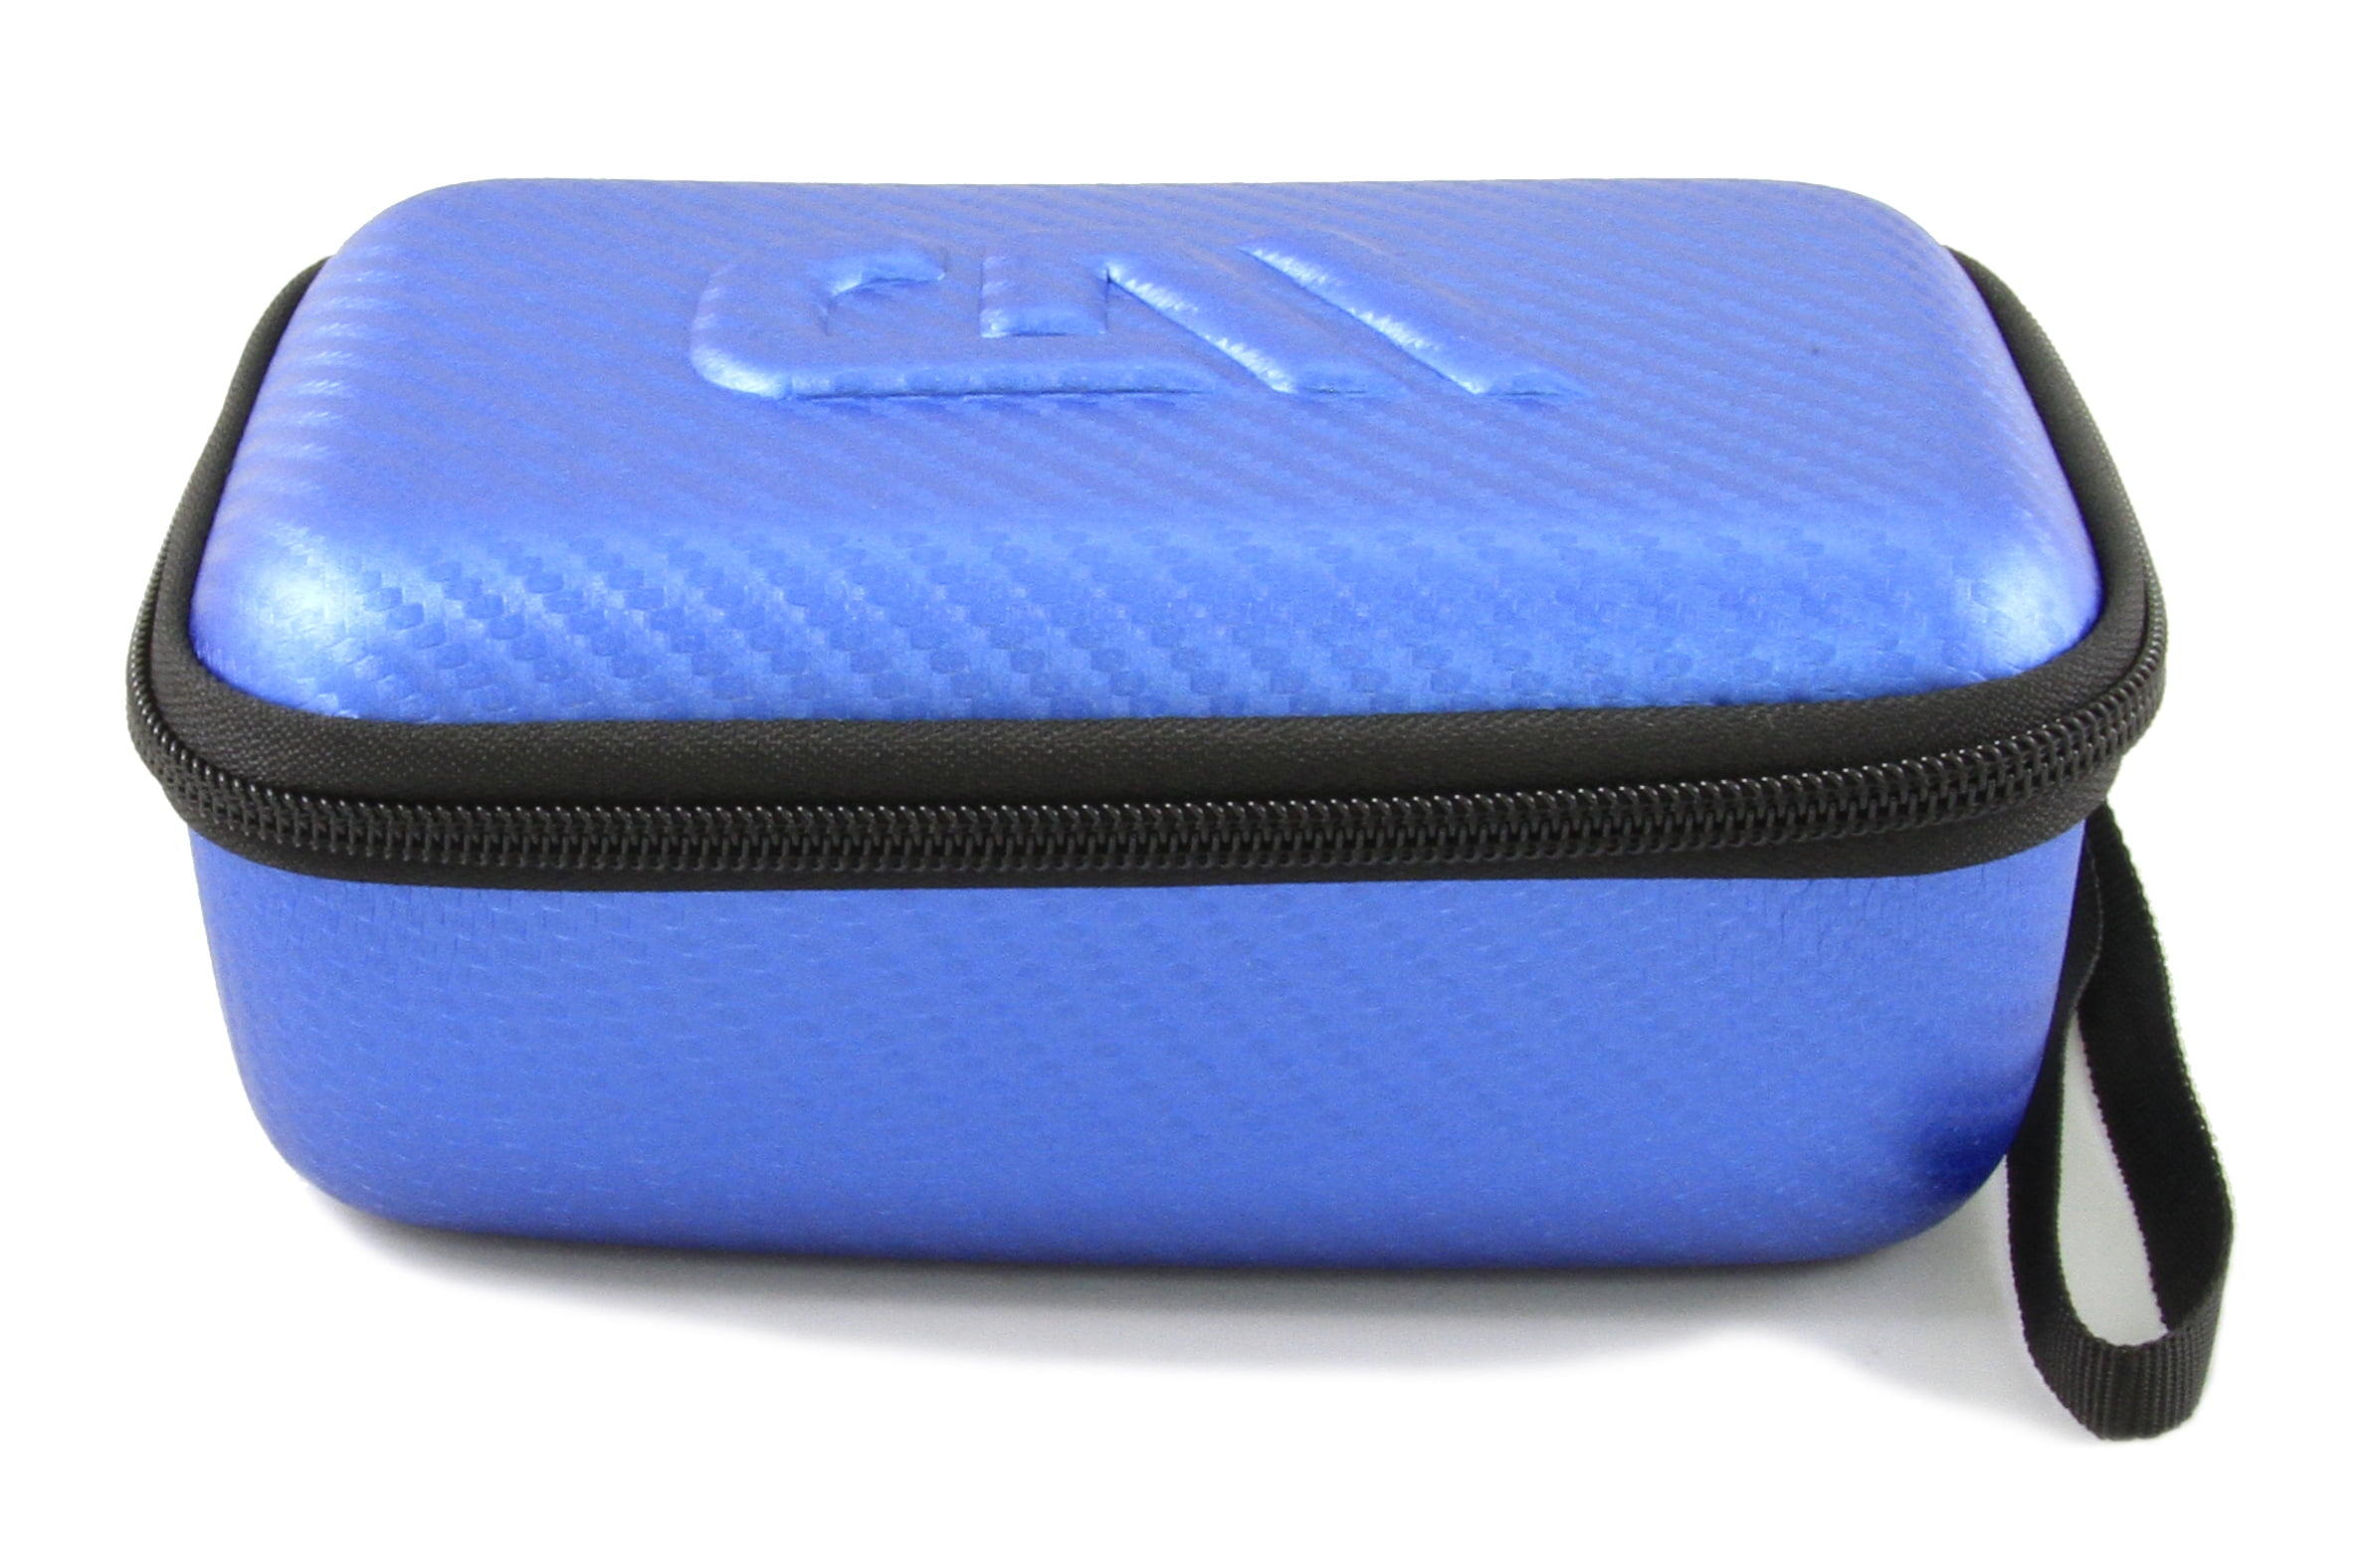 Aenllosi Hard Carrying Case for Ourlife Kids Selfie Action Child Cameras Blue 